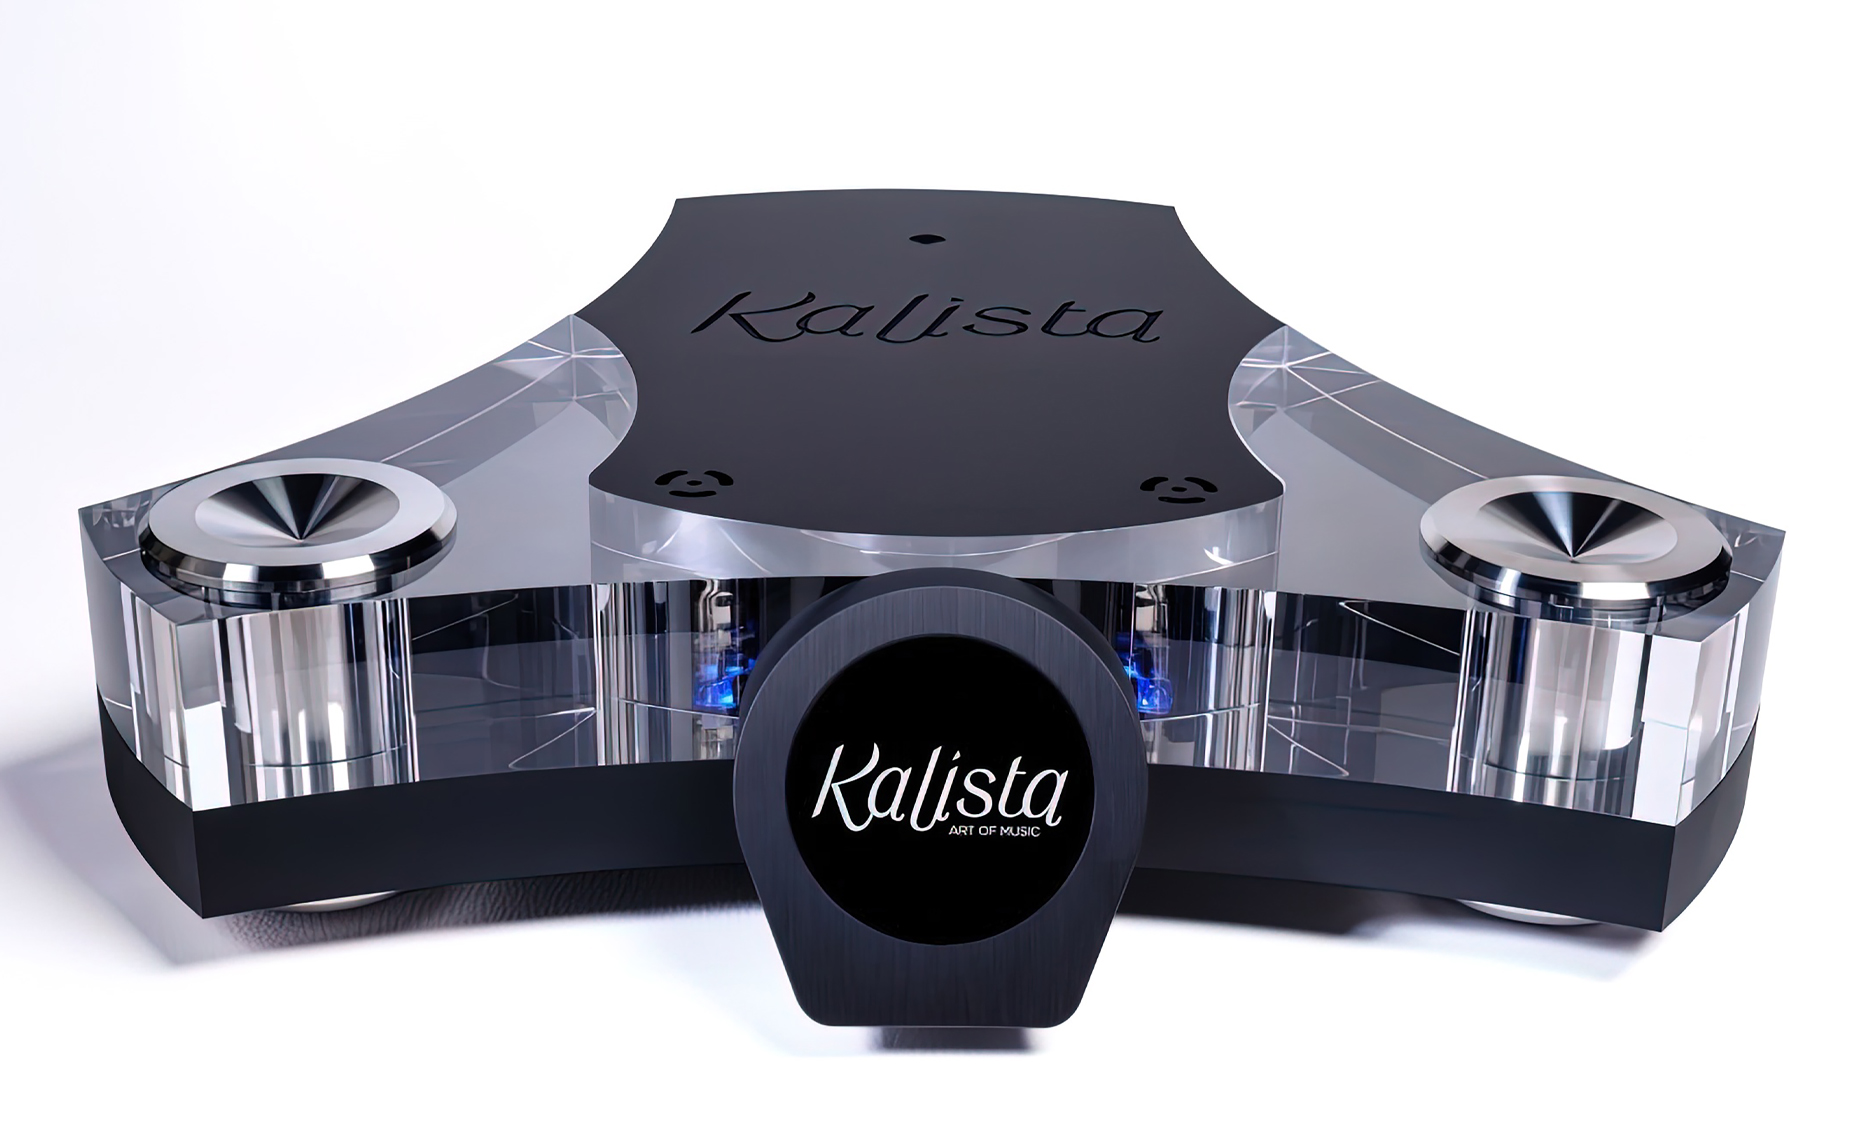 Kalista Launches a New Reference DAC : MANTAX